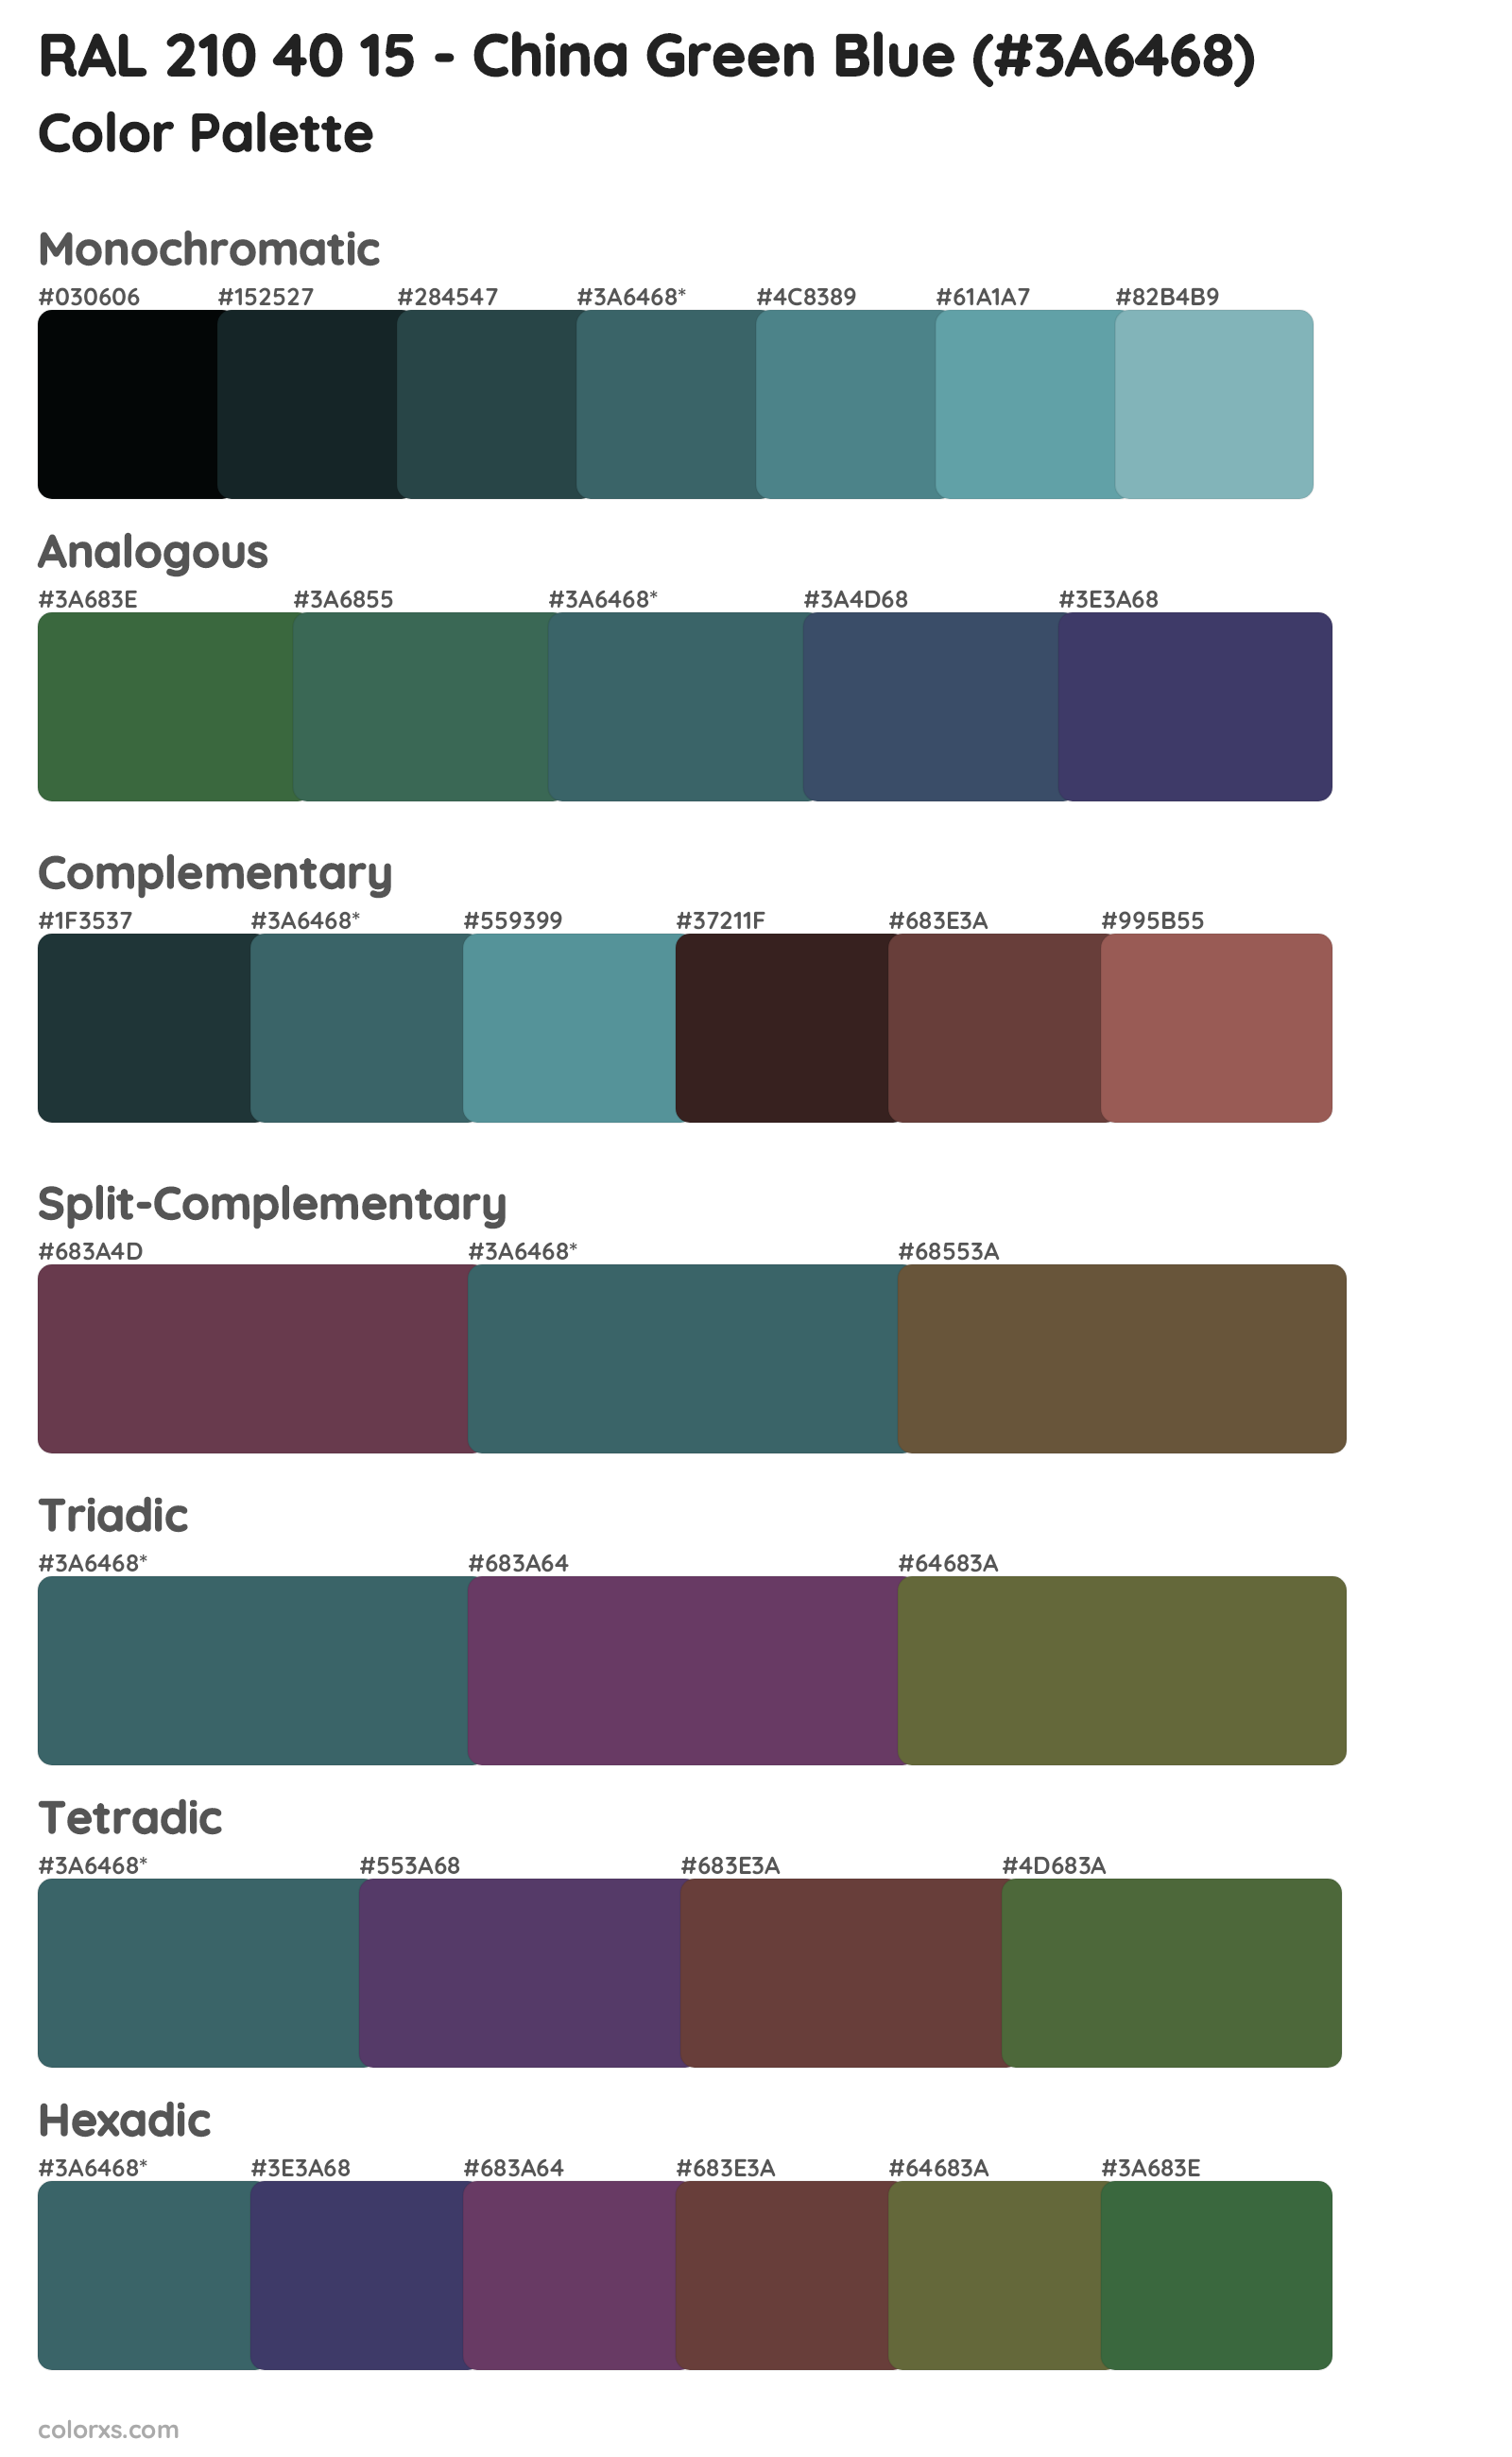 RAL 210 40 15 - China Green Blue Color Scheme Palettes